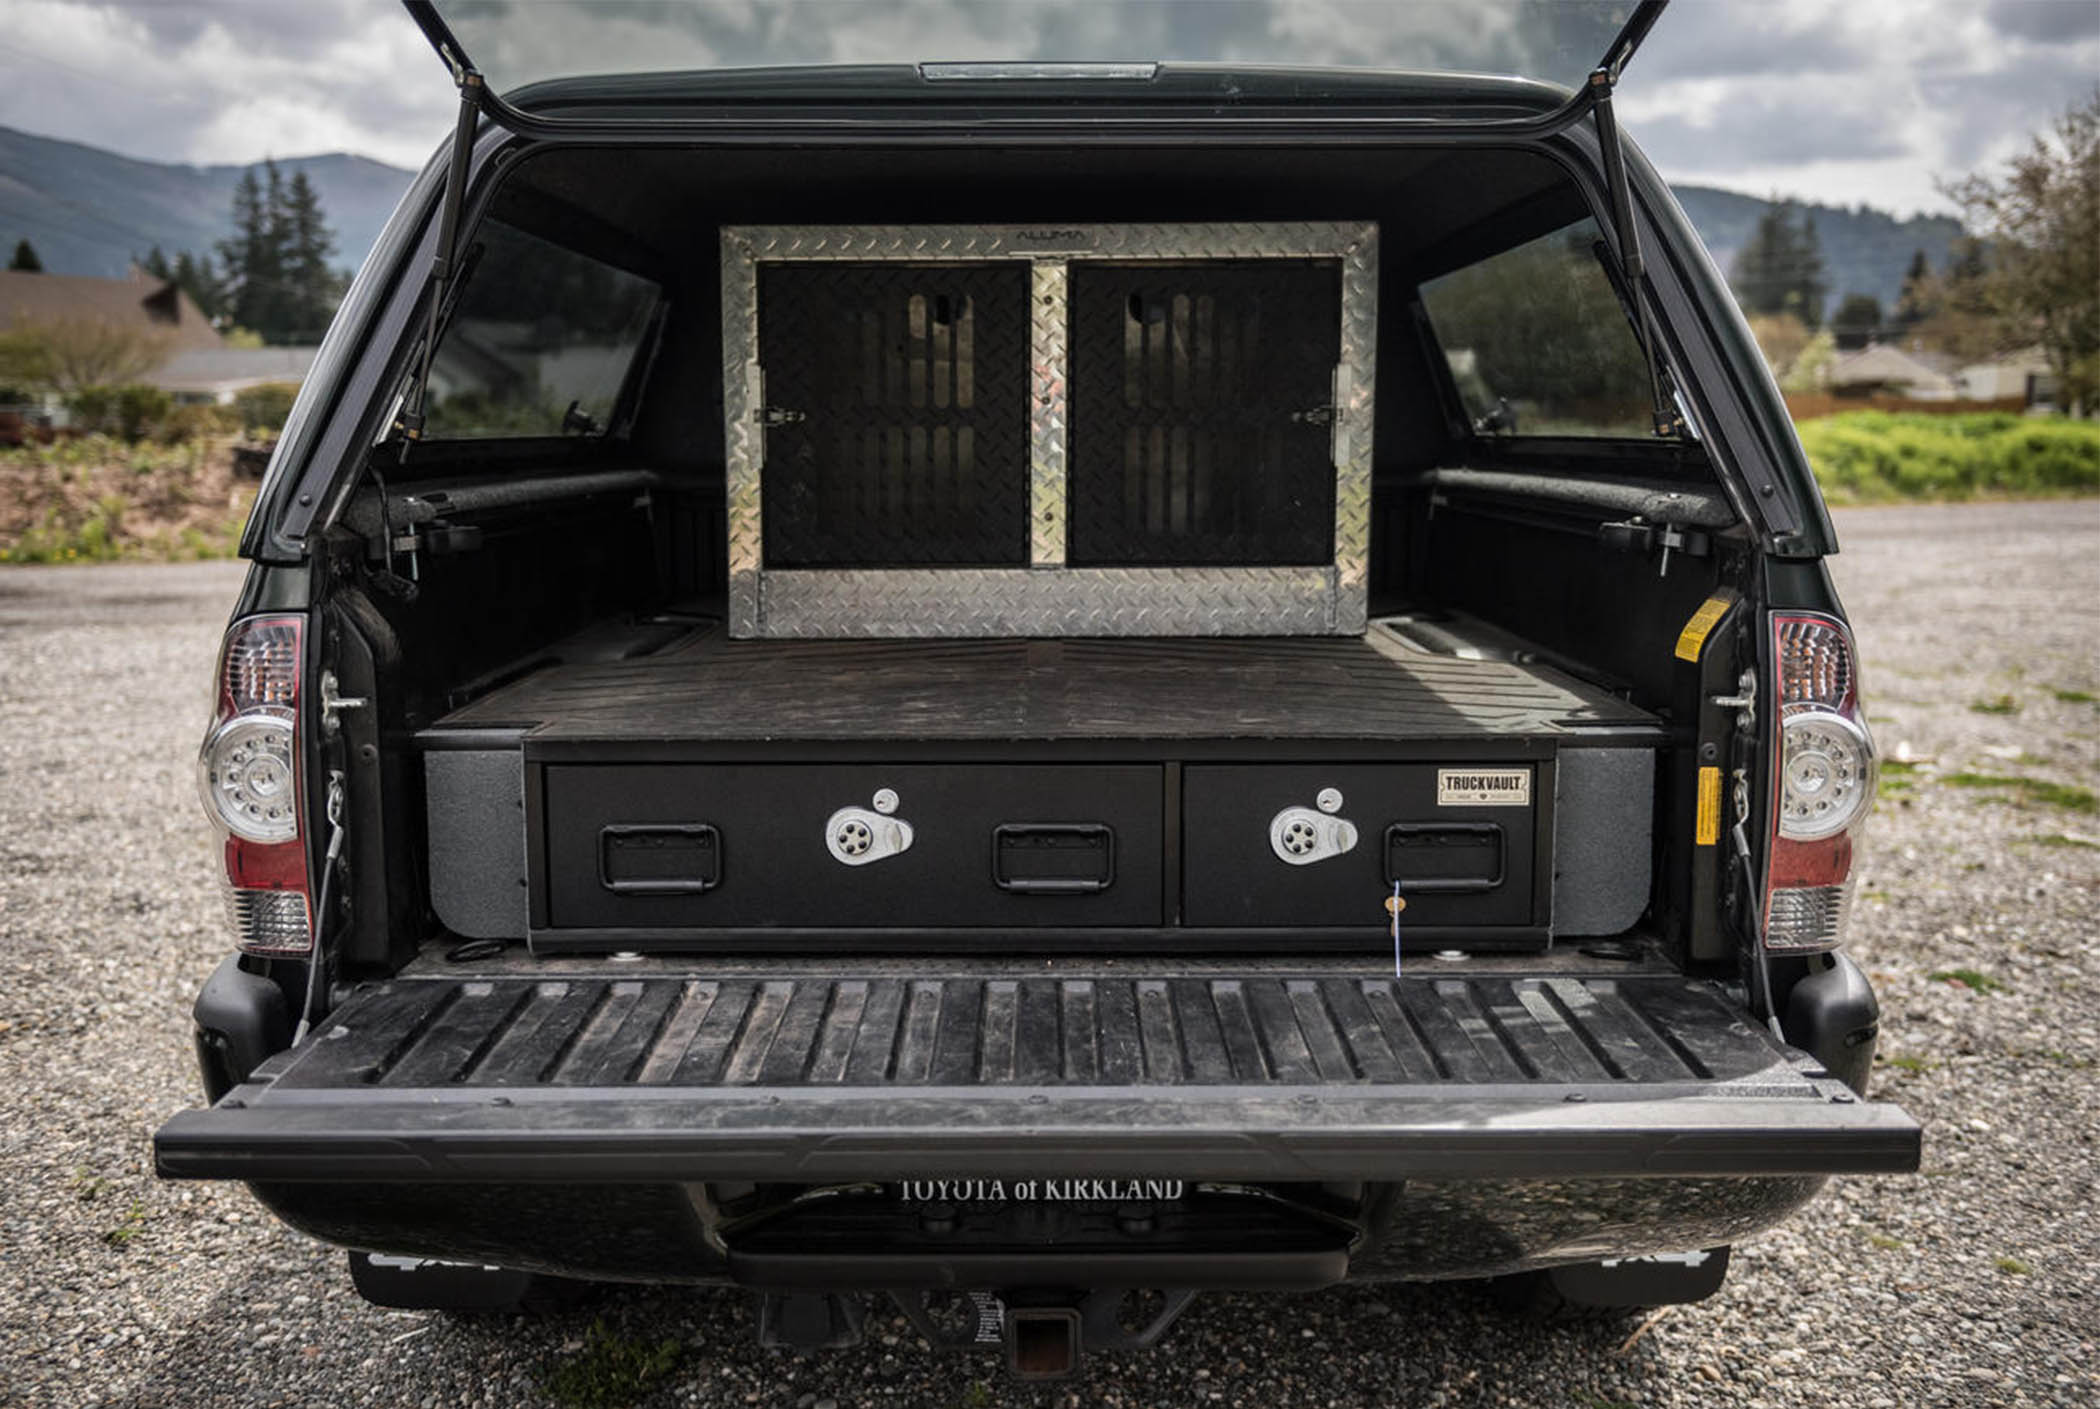 A covered bed TruckVault system for secure bird hunting storage.